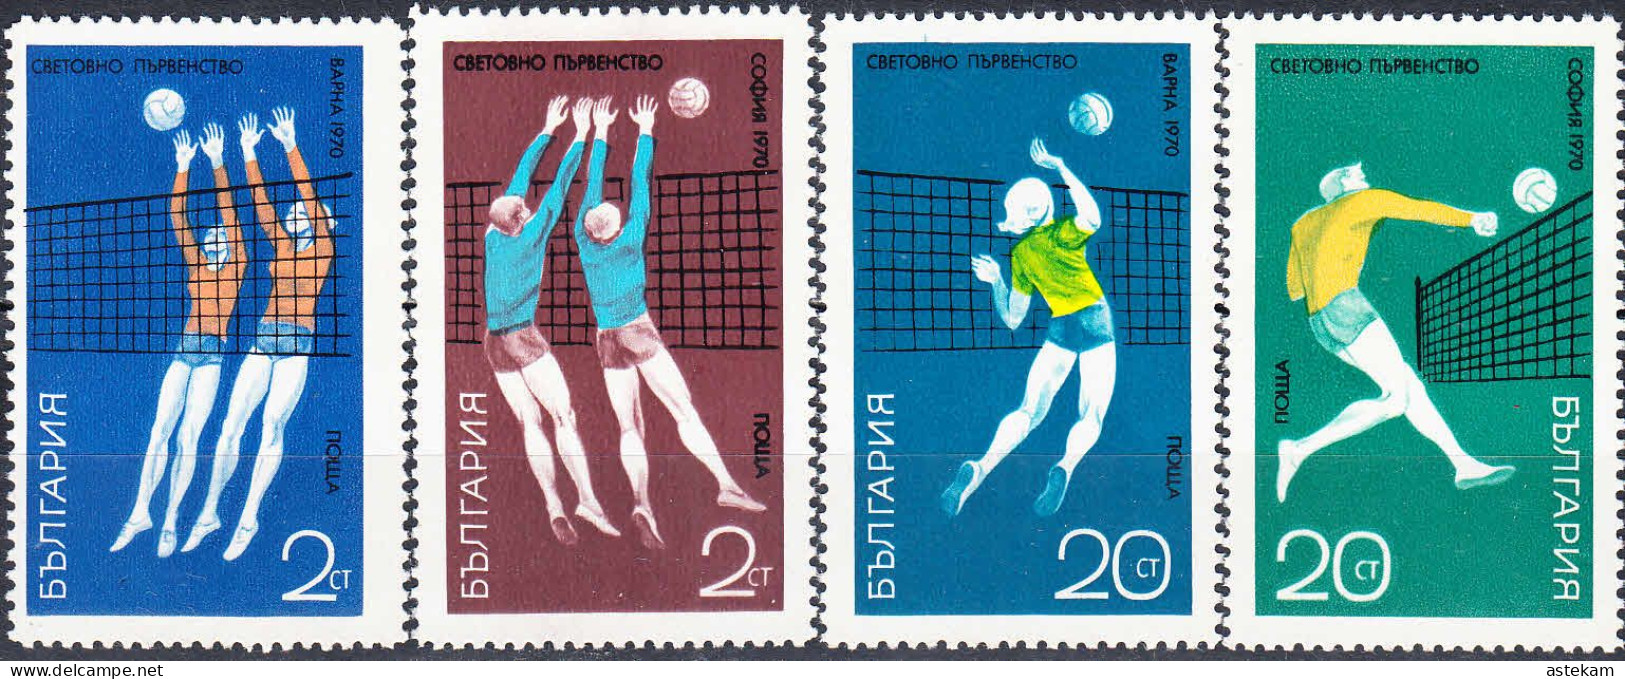 BULGARIA 1970, SPORT, WORLD VOLLEYBALL CHAMPIONSHIP For MEN And WOMEN In SOFIA, COMPLETE MNH SERIES With GOOD QUALITY*** - Nuovi